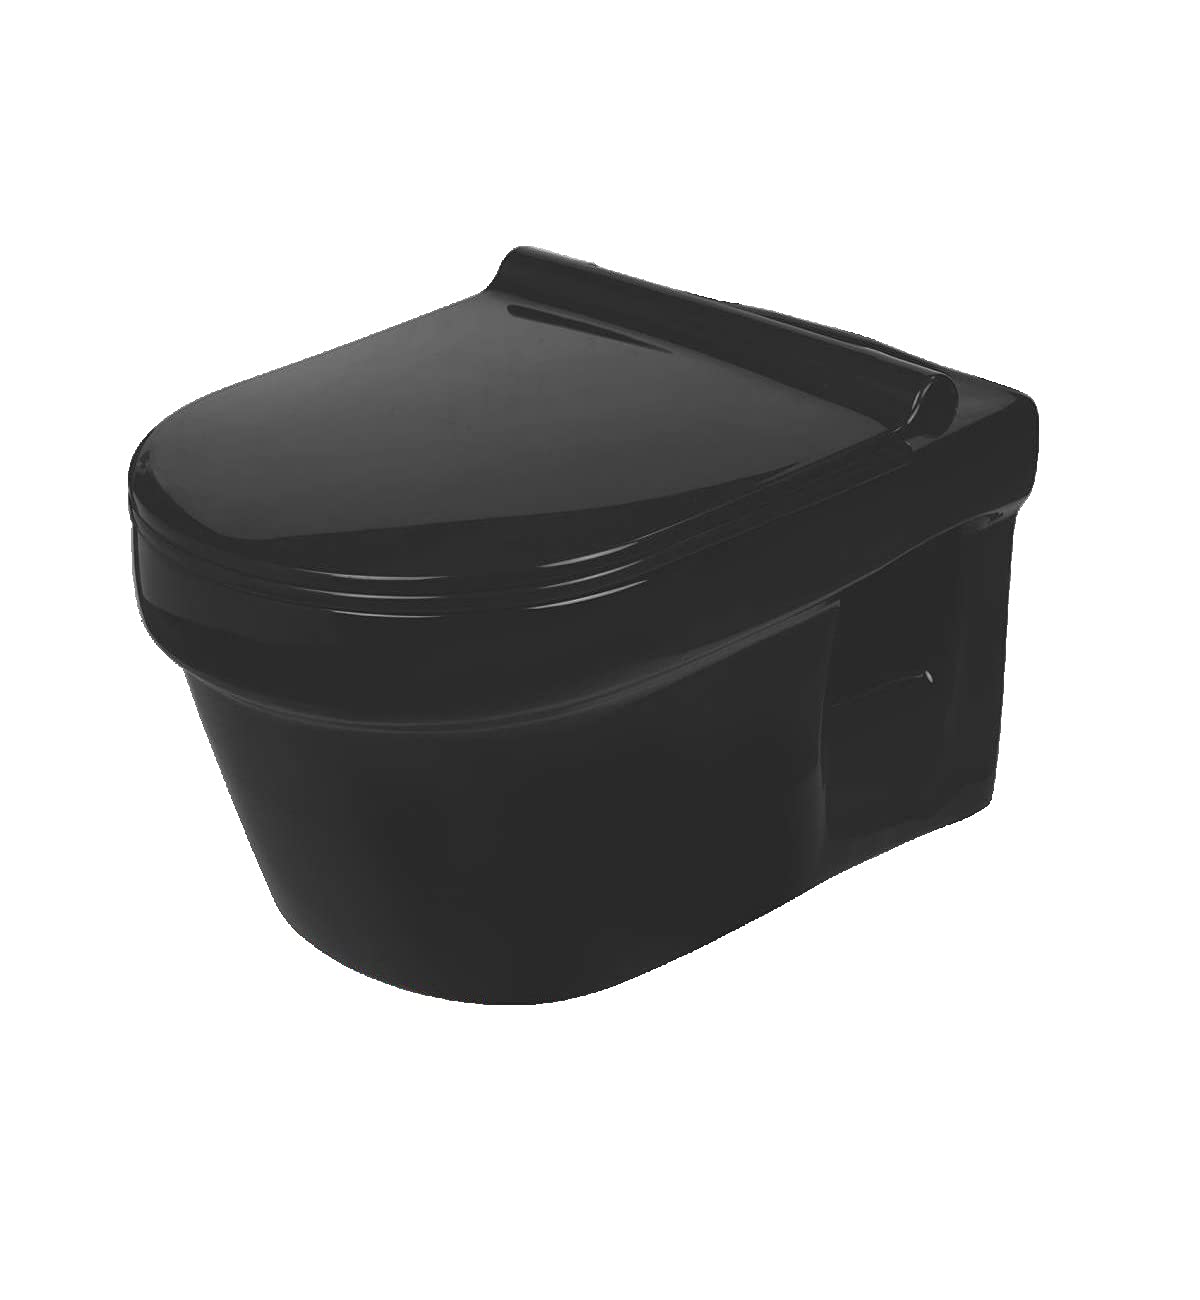 B Backline Ceramic Wall Mount Wall Hung Western Toilet Rimless Commode 20 X 14 X 13 Inches Black Glossy